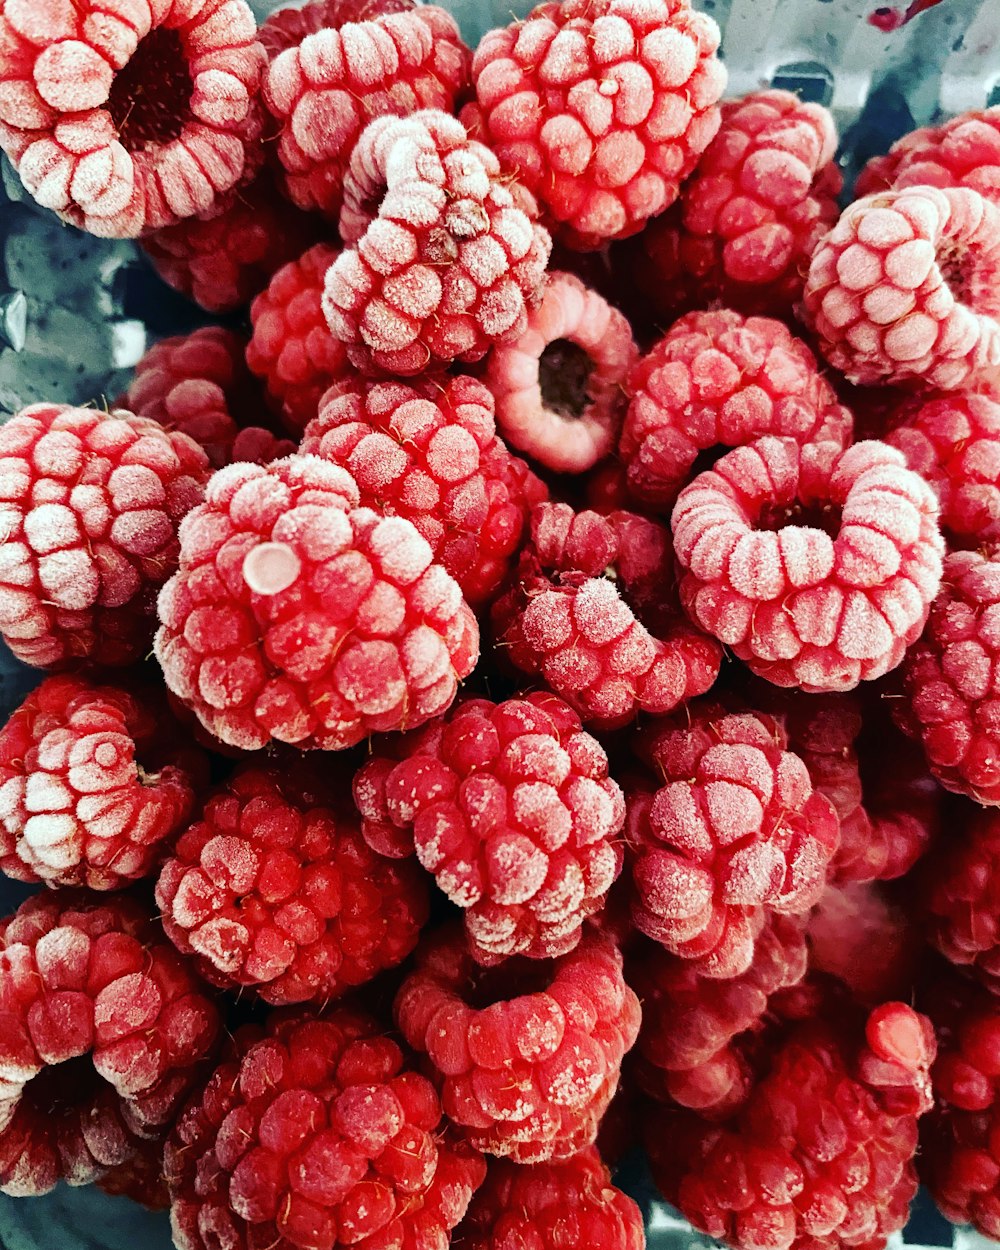 red round fruits on display